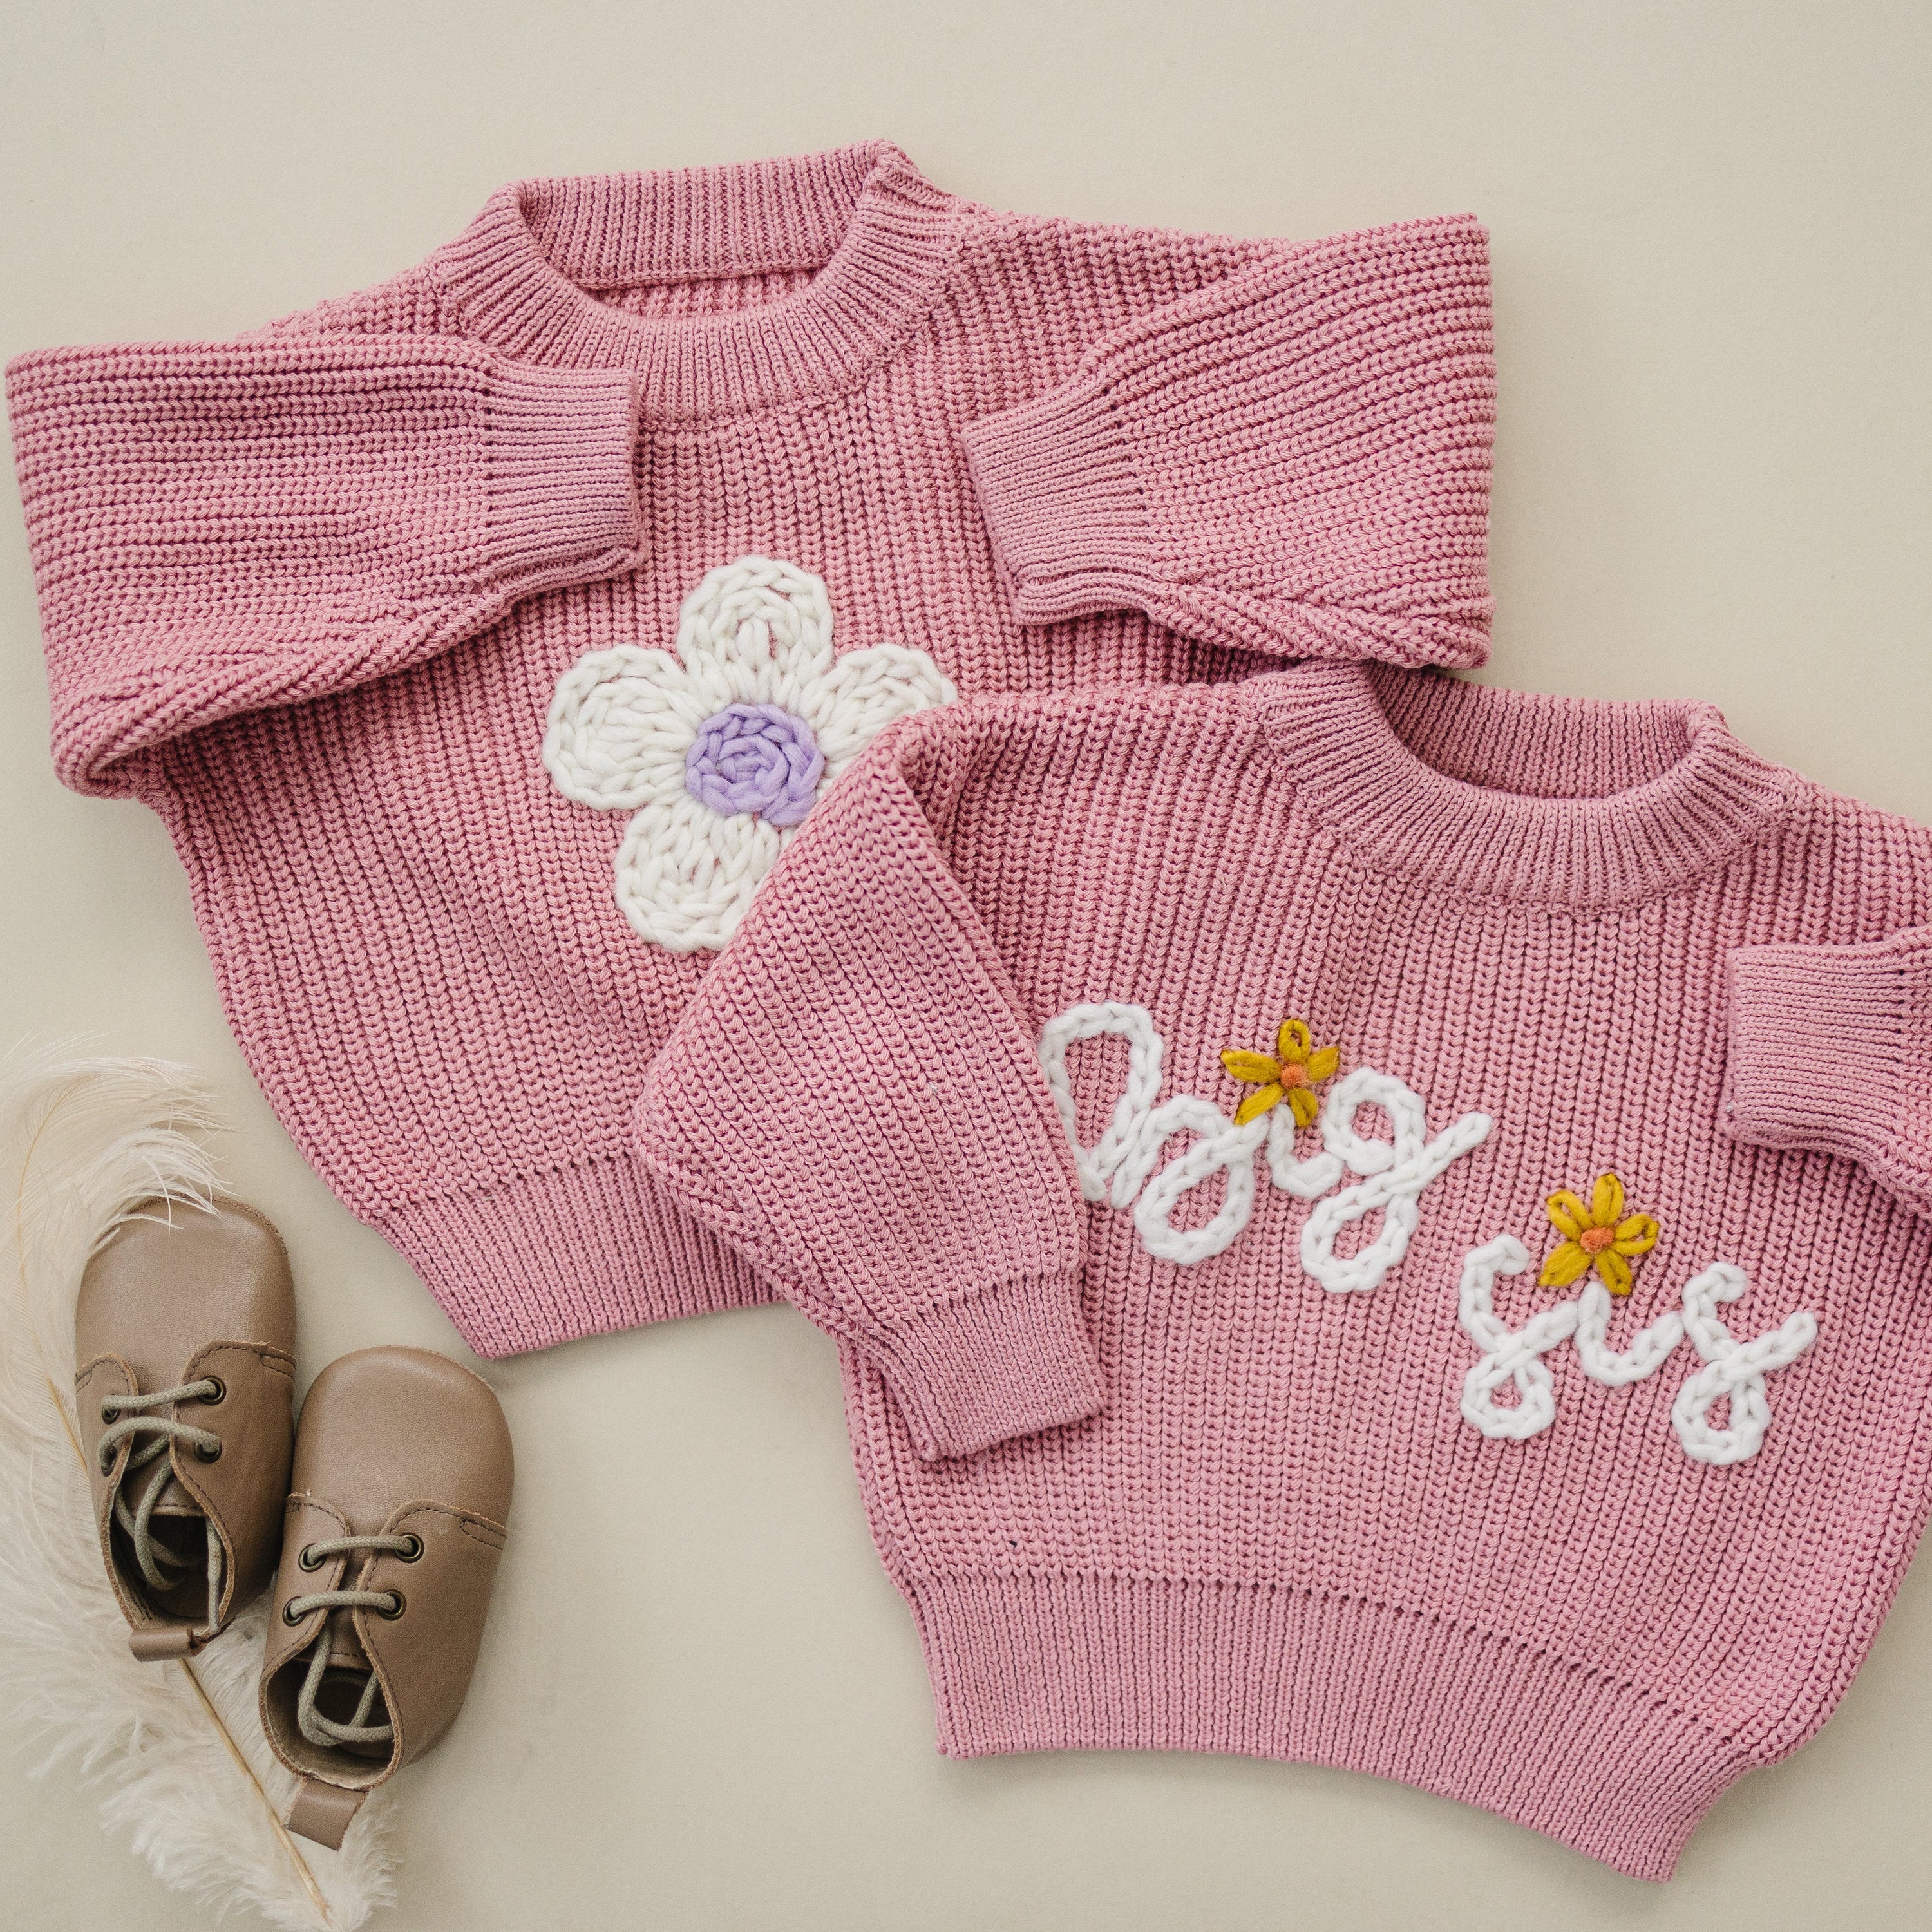 Big Sis Hand Embroidered Chunky Knit Sweater for Babies & Toddlers - Sister Embroidered Baby Sweater - Pregnancy Announcement Shirt